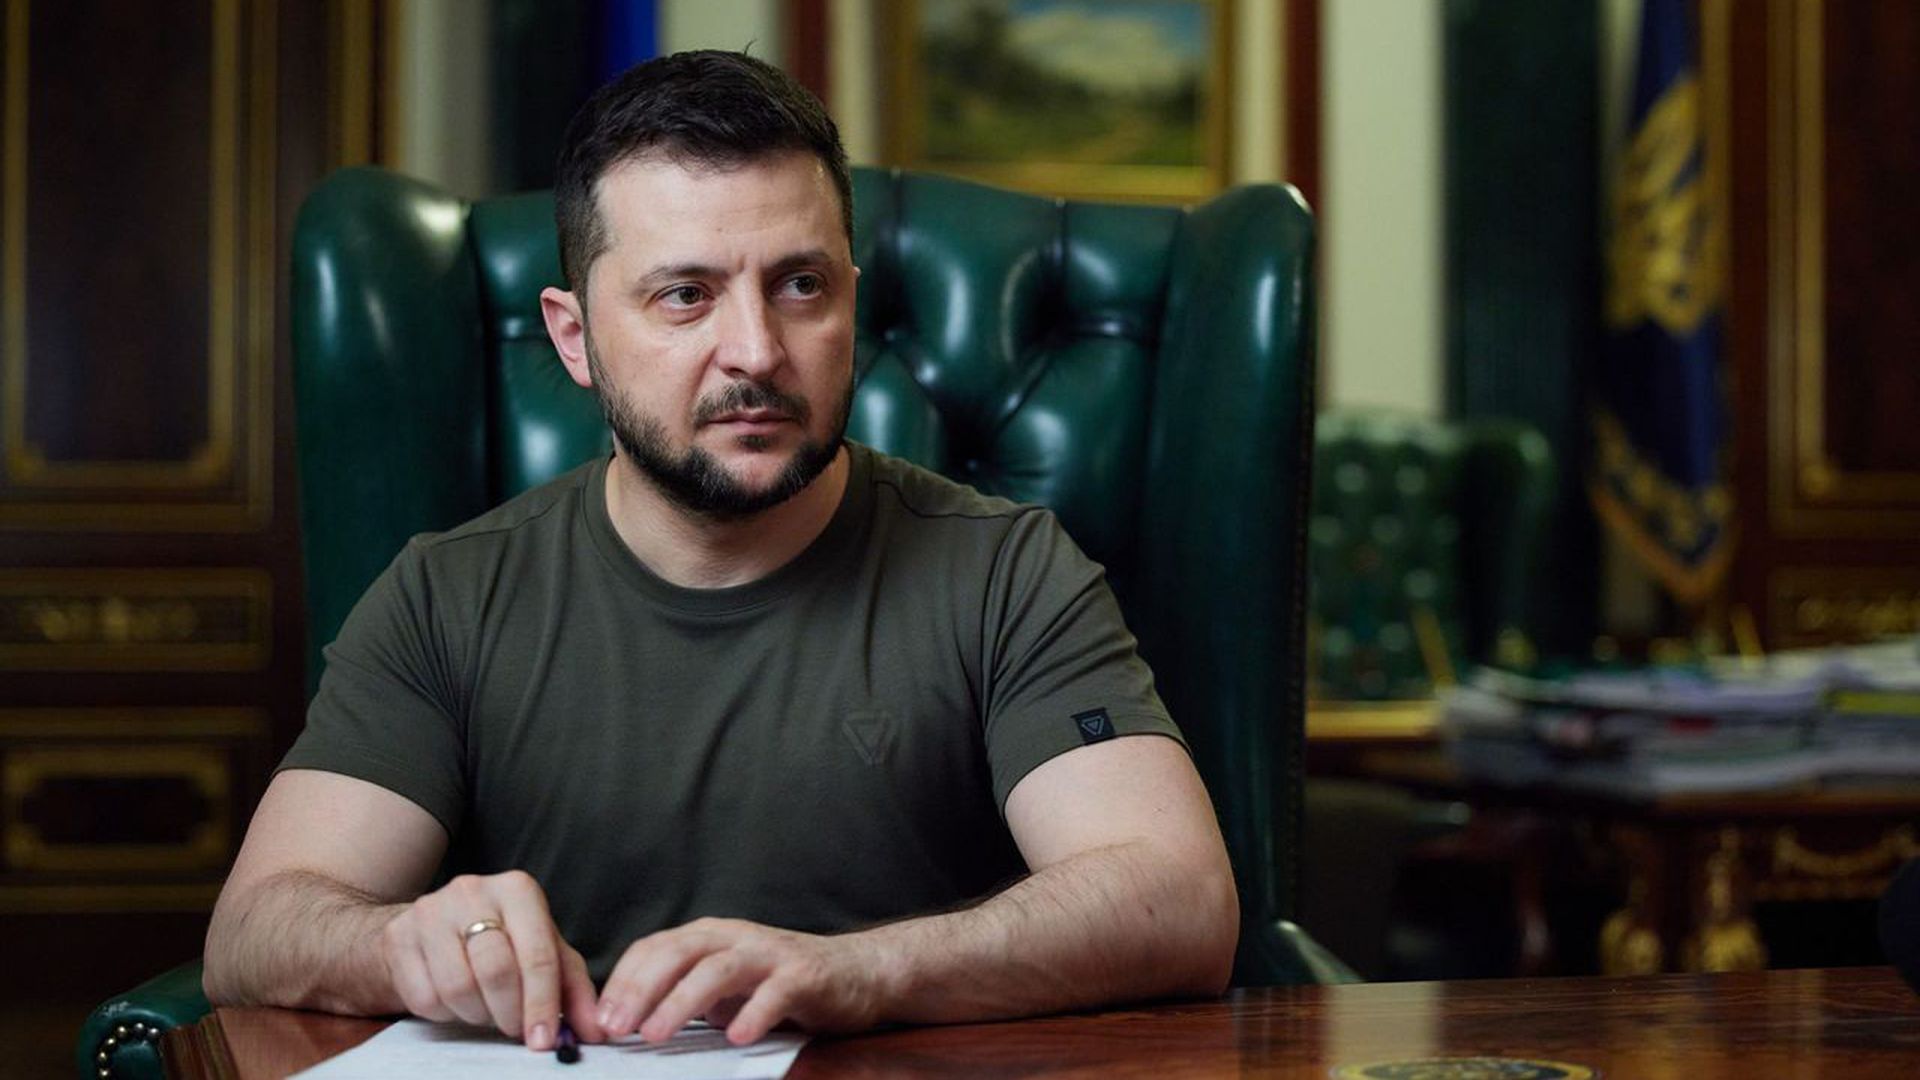 Photo of Volodymyr Zelenskyy sitting at a table with his hands resting on a piece of paper as he looks to his left